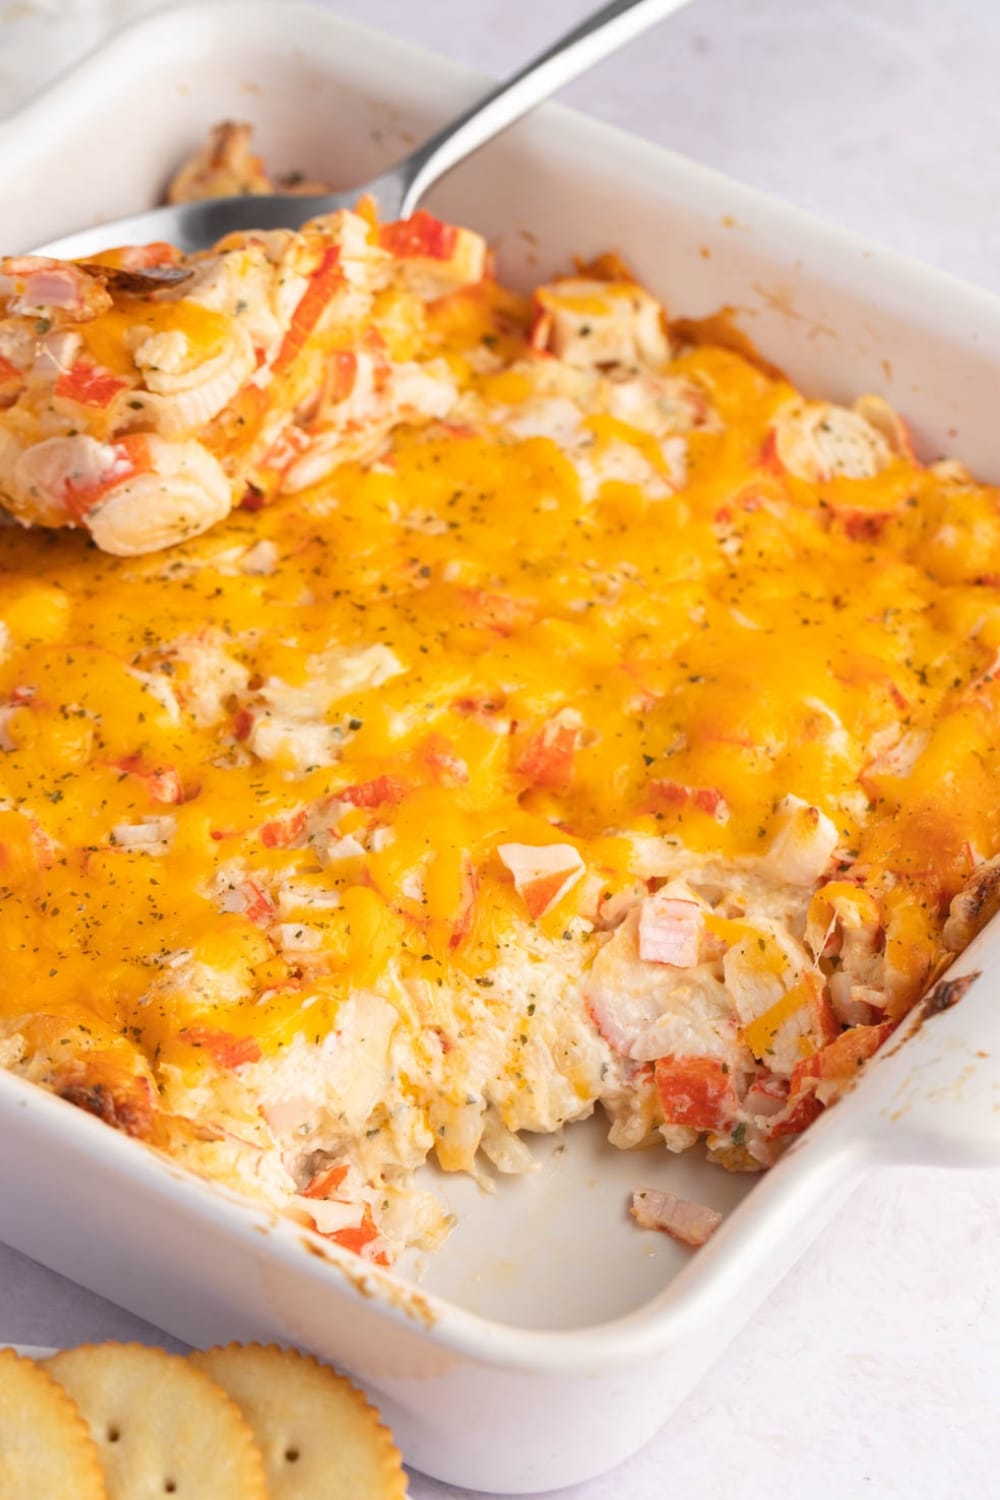 Crab meat, onion, spices, cheese, cream cheese, mayo, and sour cream baked on a casserole served with crackers on the side